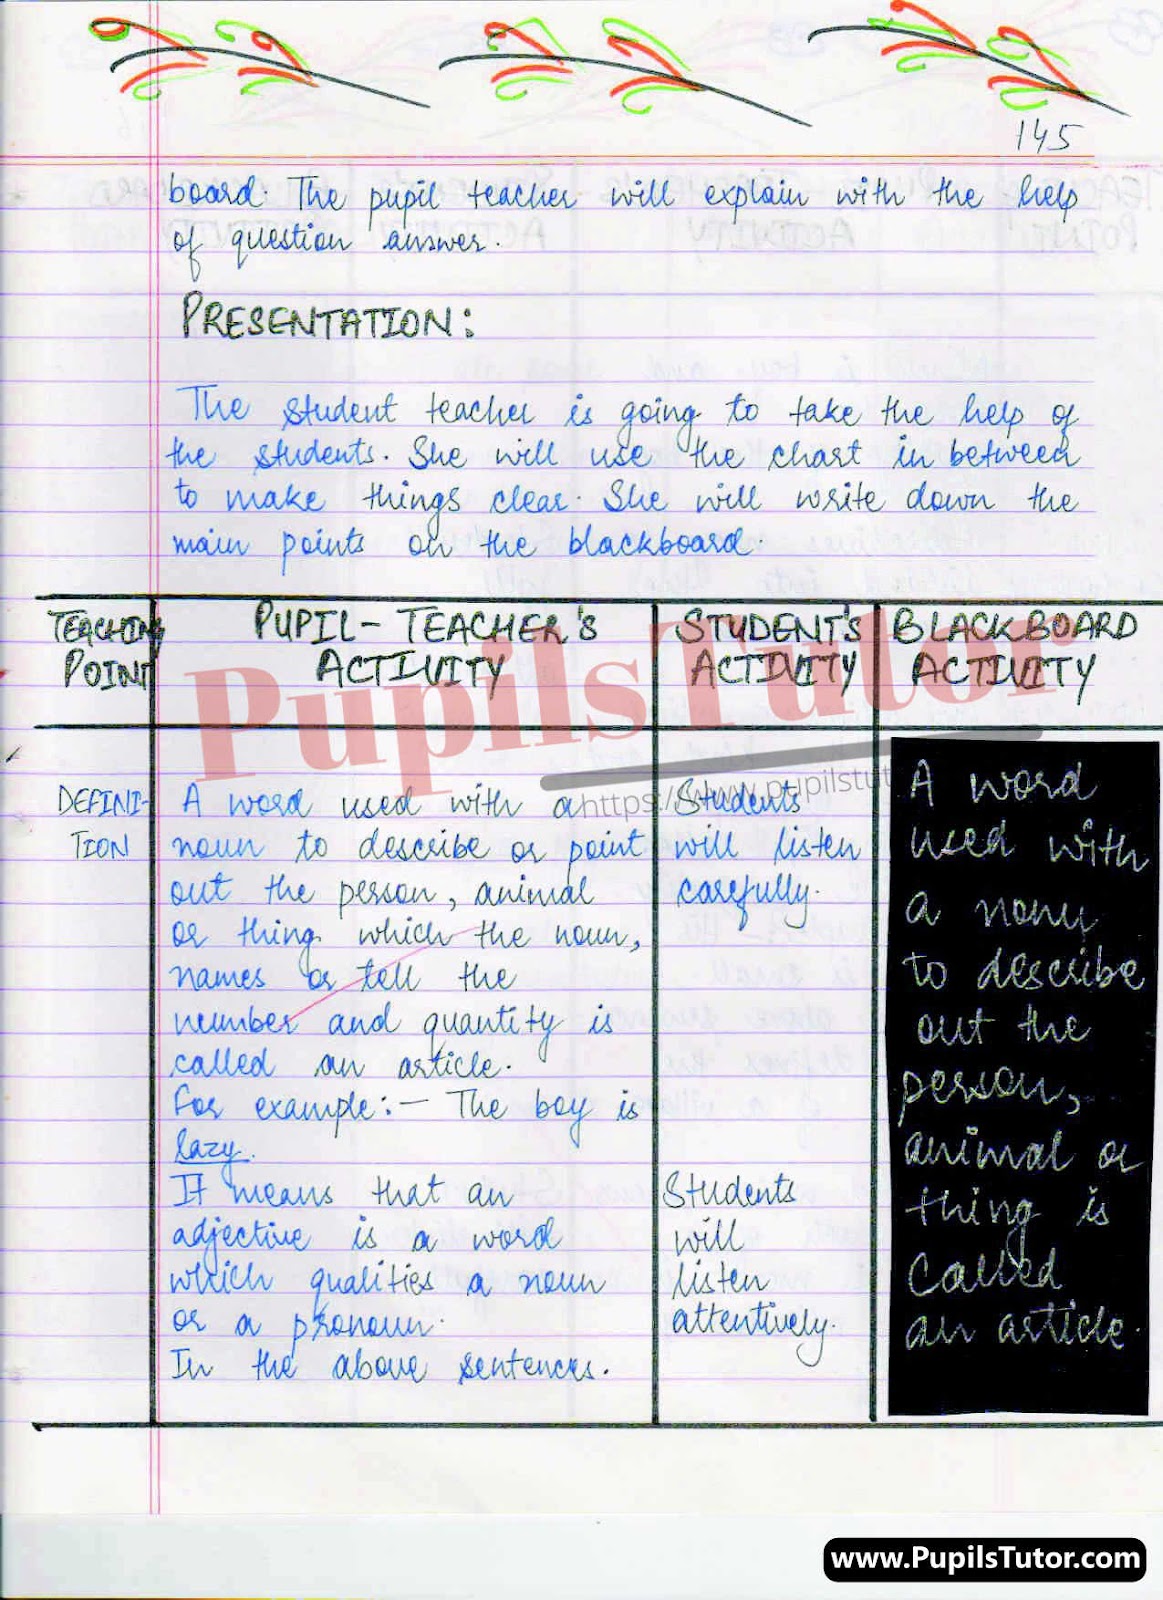 English Grammar Lesson Plan On Adjective For Class/Grade 4 To 8 For CBSE NCERT School And College Teachers  – (Page And Image Number 3) – www.pupilstutor.com